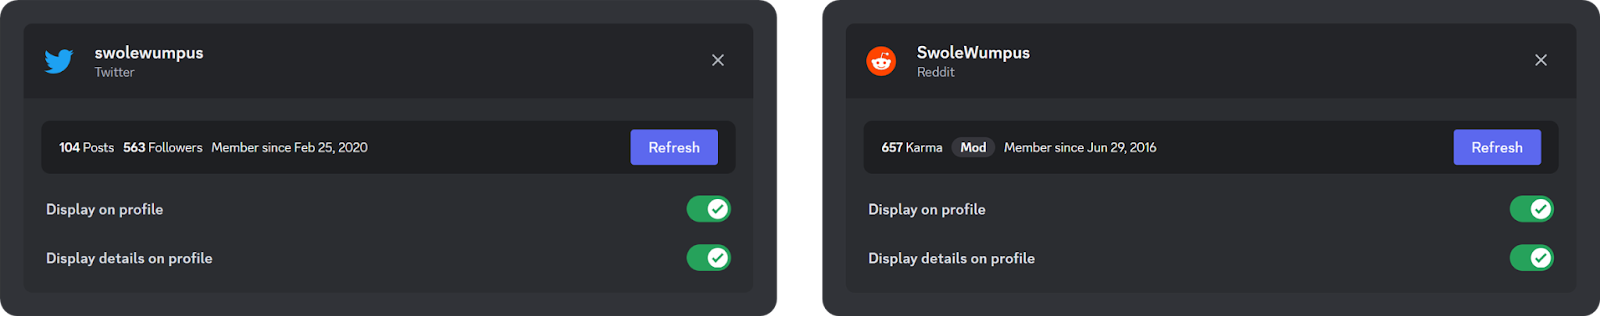 Examples of Twitter and Reddit connections in Discord